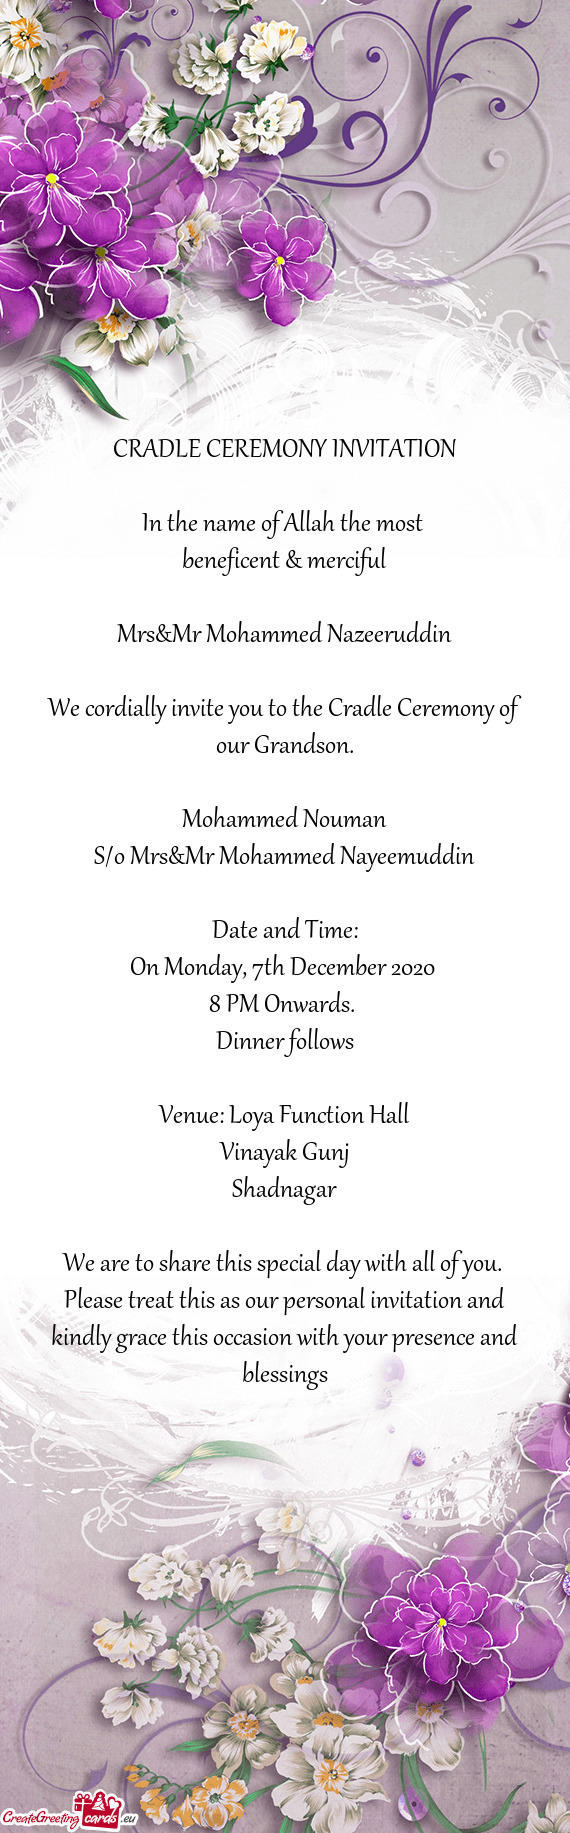 Ed Nazeeruddin
 
 We cordially invite you to the Cradle Ceremony of our Grandson